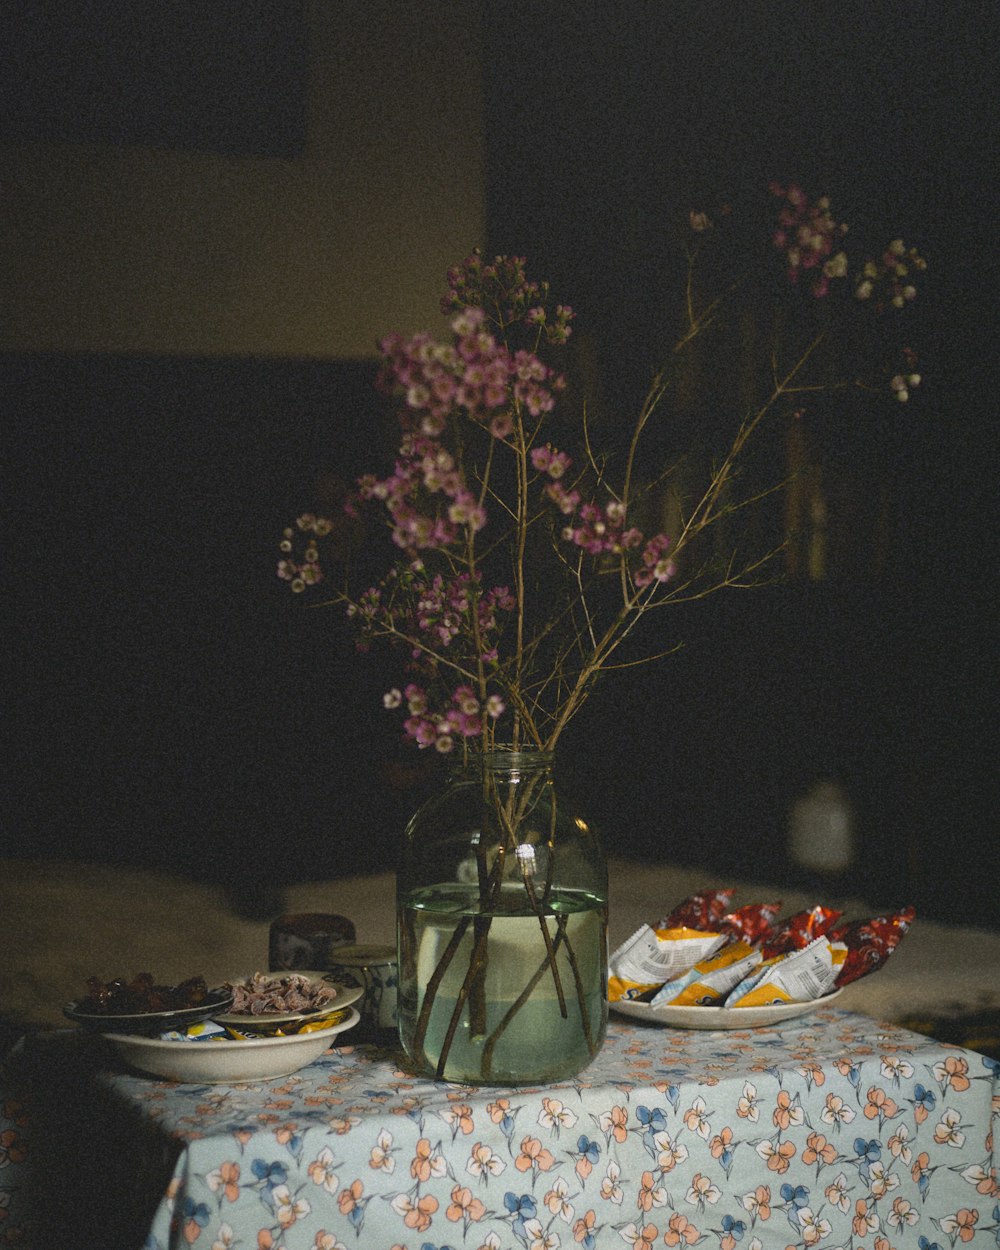 a table topped with plates of food and a vase filled with flowers